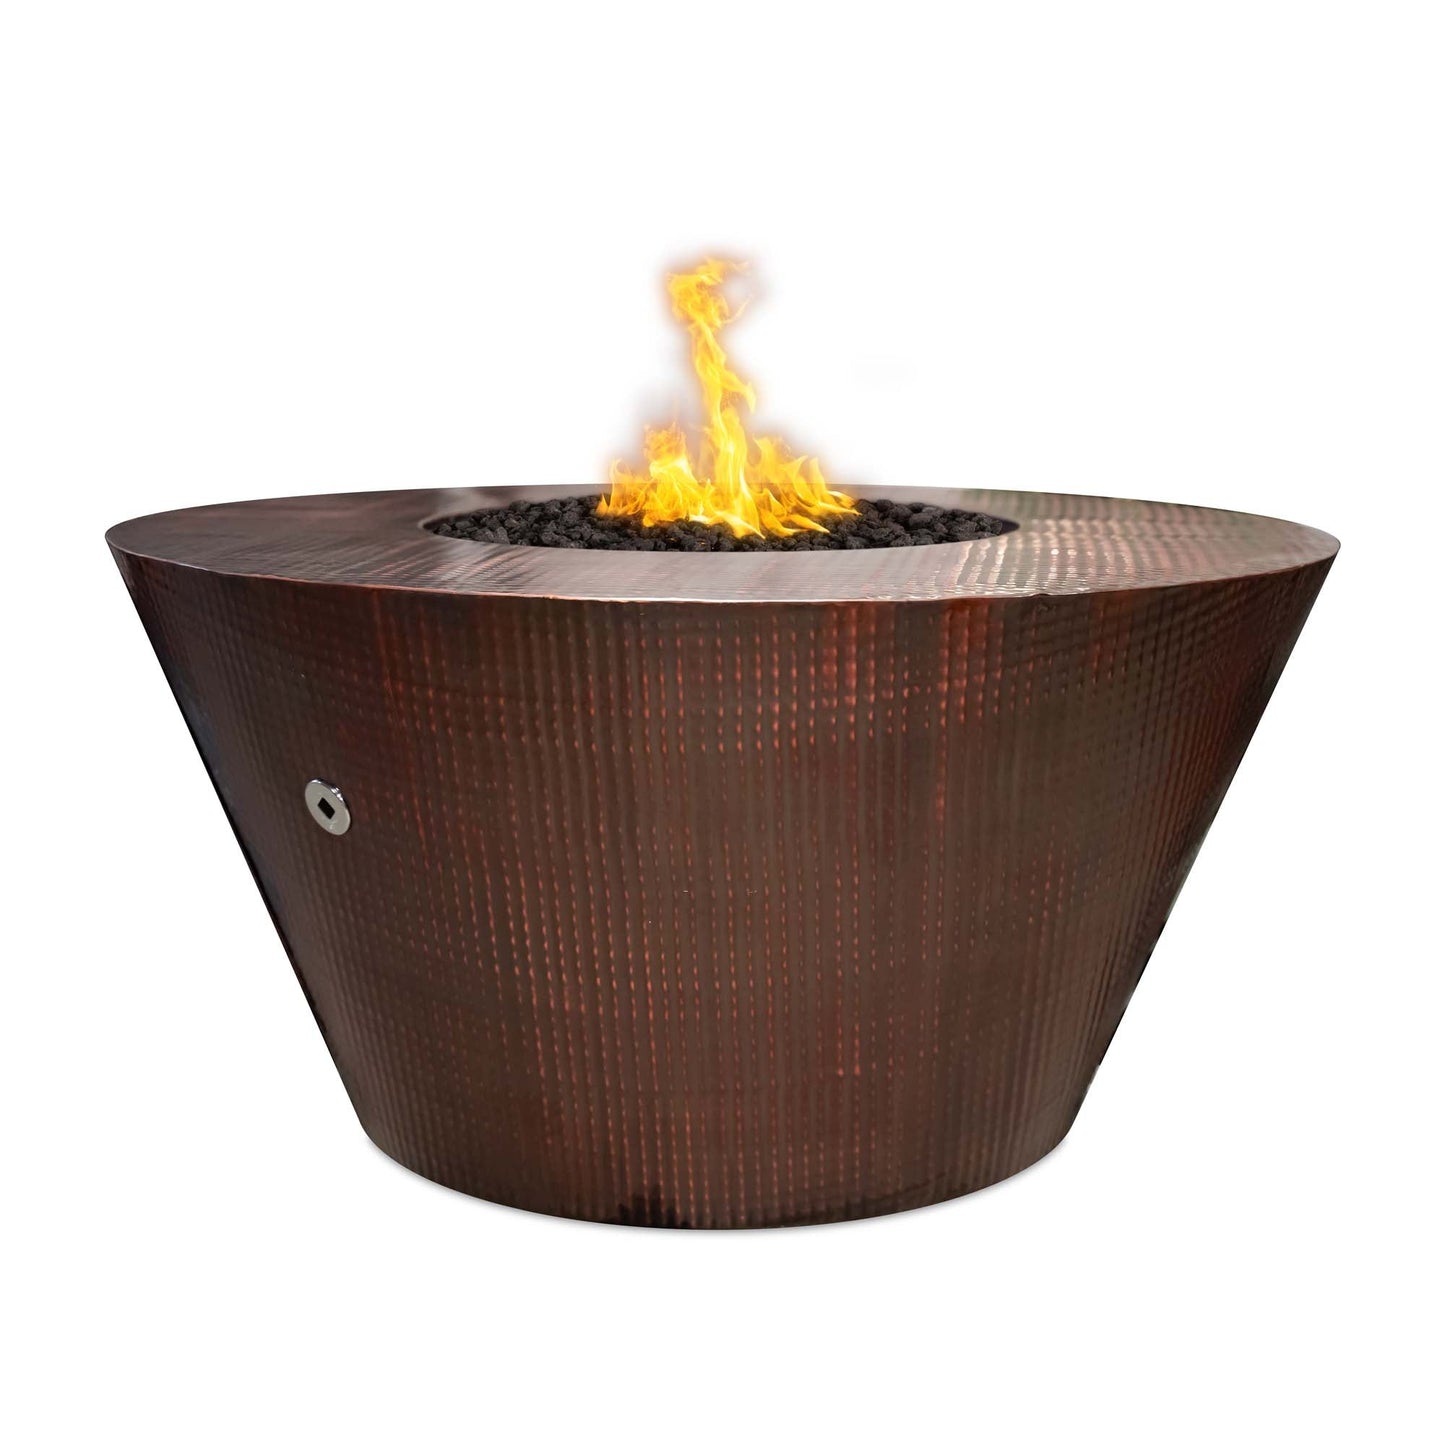 The Outdoor Plus Round Martillo 48" Corten Steel Natural Gas Fire Pit with Match Lit with Flame Sense Ignition